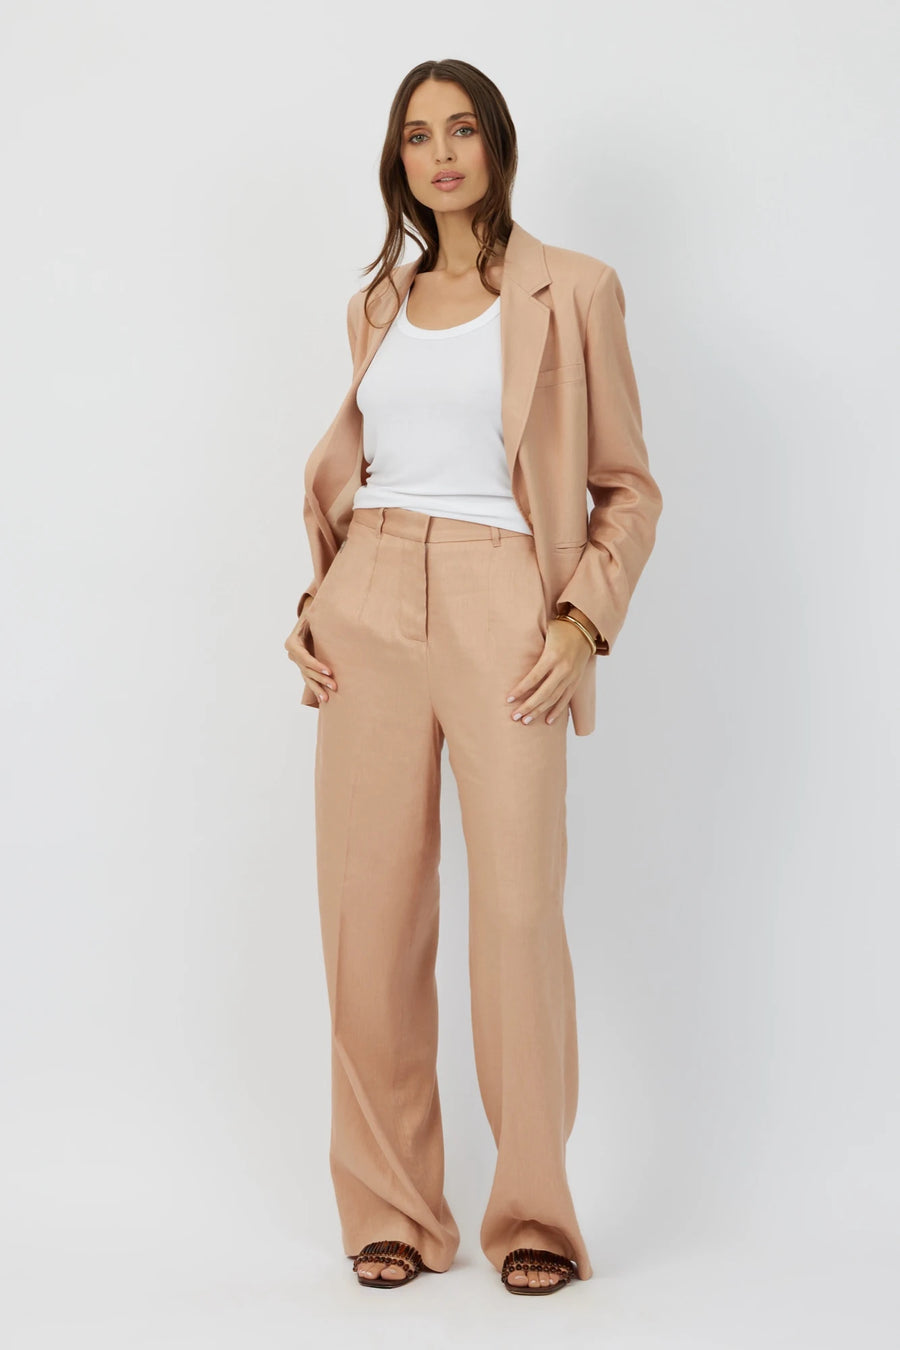 The Regatta belted wide leg pants in sesame by Greyven